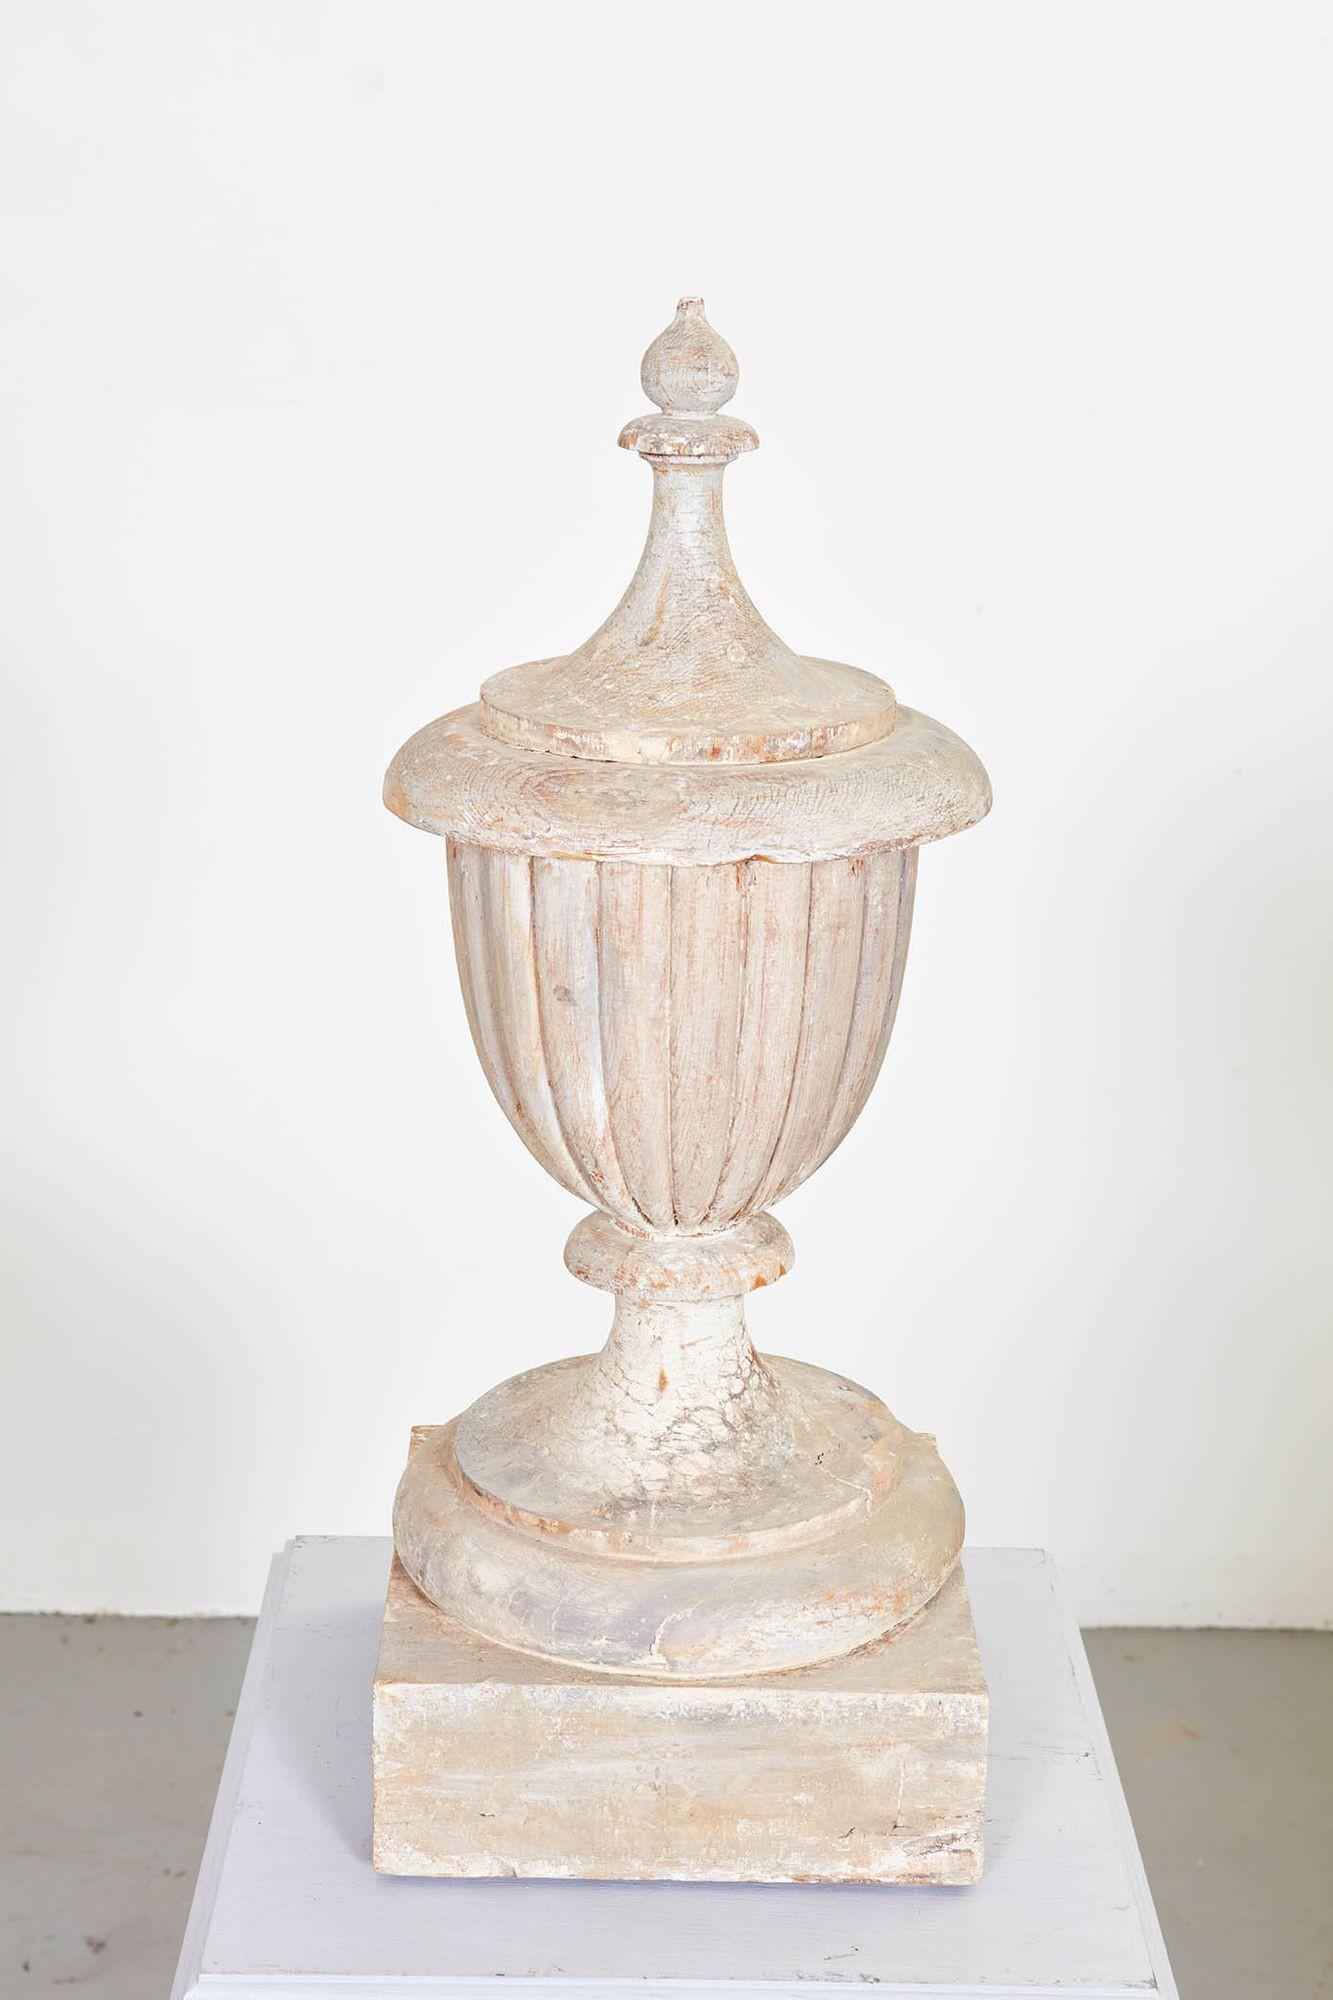 A carved and painted 19th century classical urn with lobed body on footed base topped by turned cap and finial and featuring a superb patina. Now on new wooden plinth with paneled sides and molded top and base.
Urn dimensions: 10